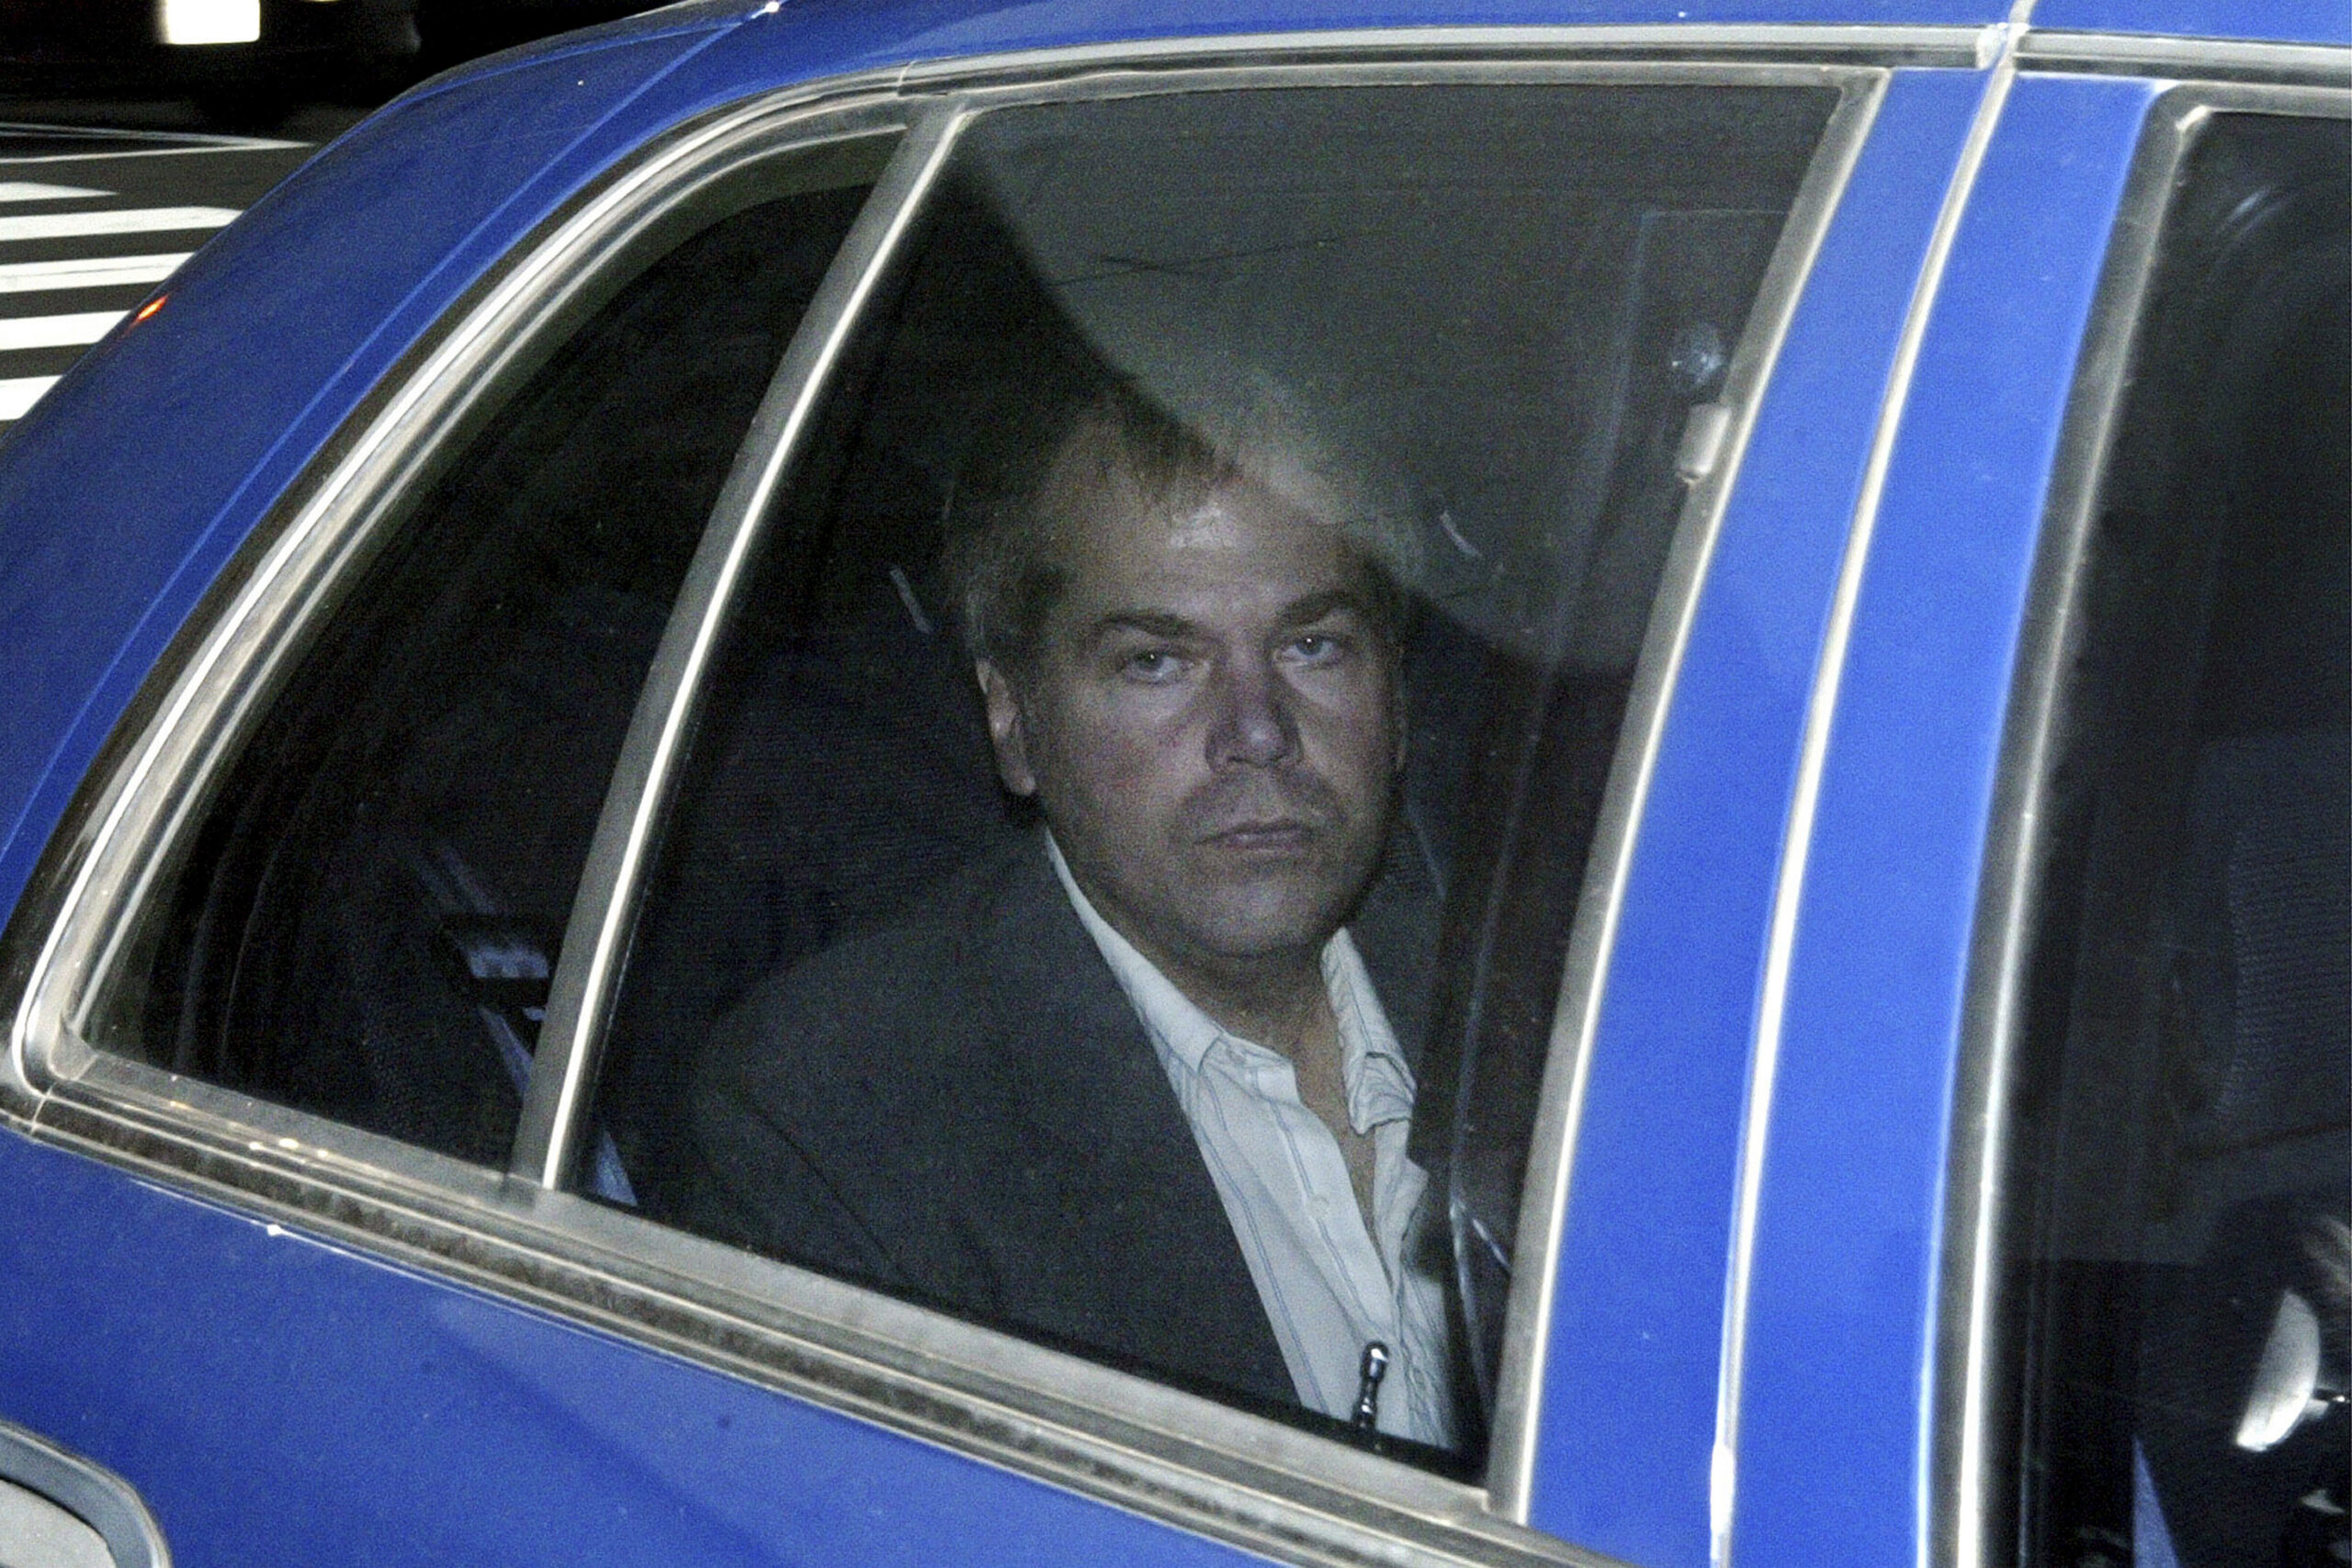 FILE — John Hinckley Jr. arrives at U.S. District Court in Washington, Nov 18, 2003. A July 8, 2022, concert by Hinckley, who shot and wounded President Ronald Reagan in 1981, has been canceled on Wednesday, June 15, citing "very real and worsening threats and hate," by the Market Hotel, in the Brooklyn borough of New York. (AP Photo/Evan Vucci, File)